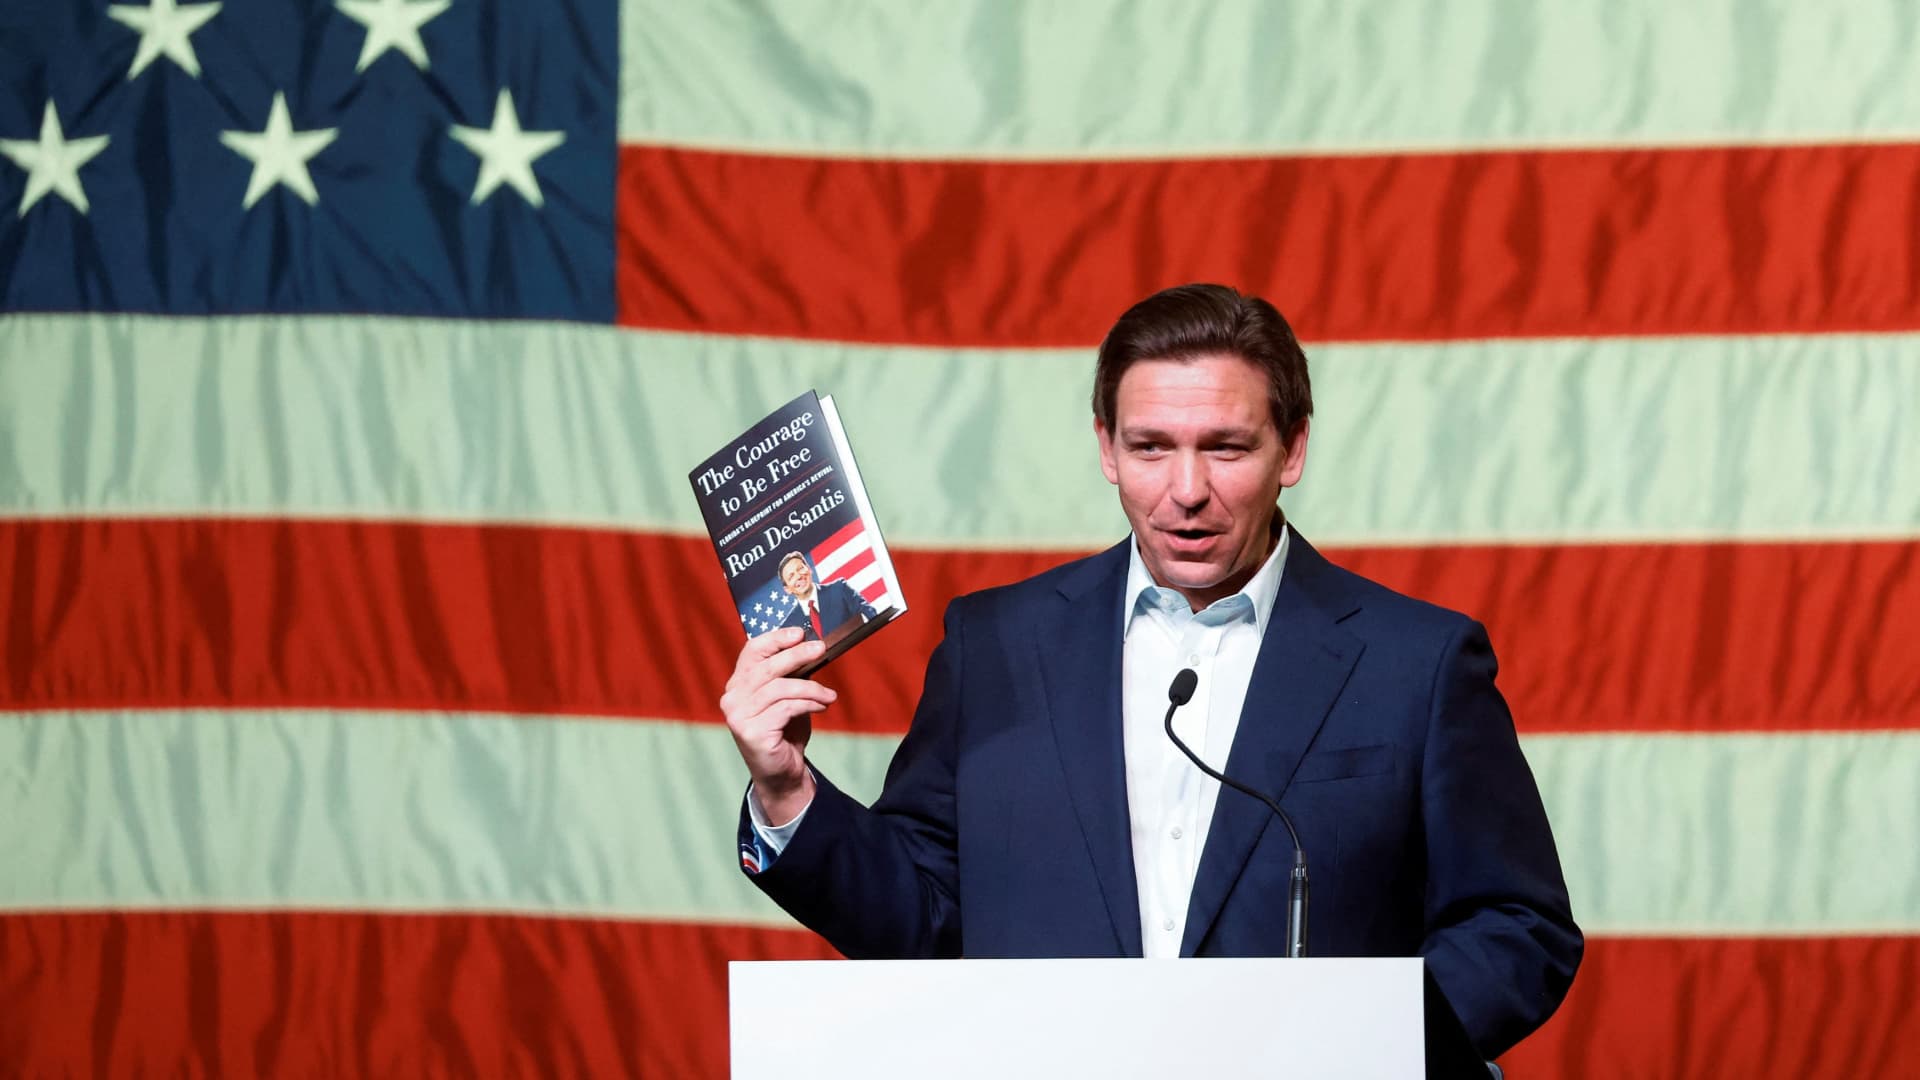 DeSantis first-week memoir sales far outpace books by Trump, Pence, Clinton and Obama